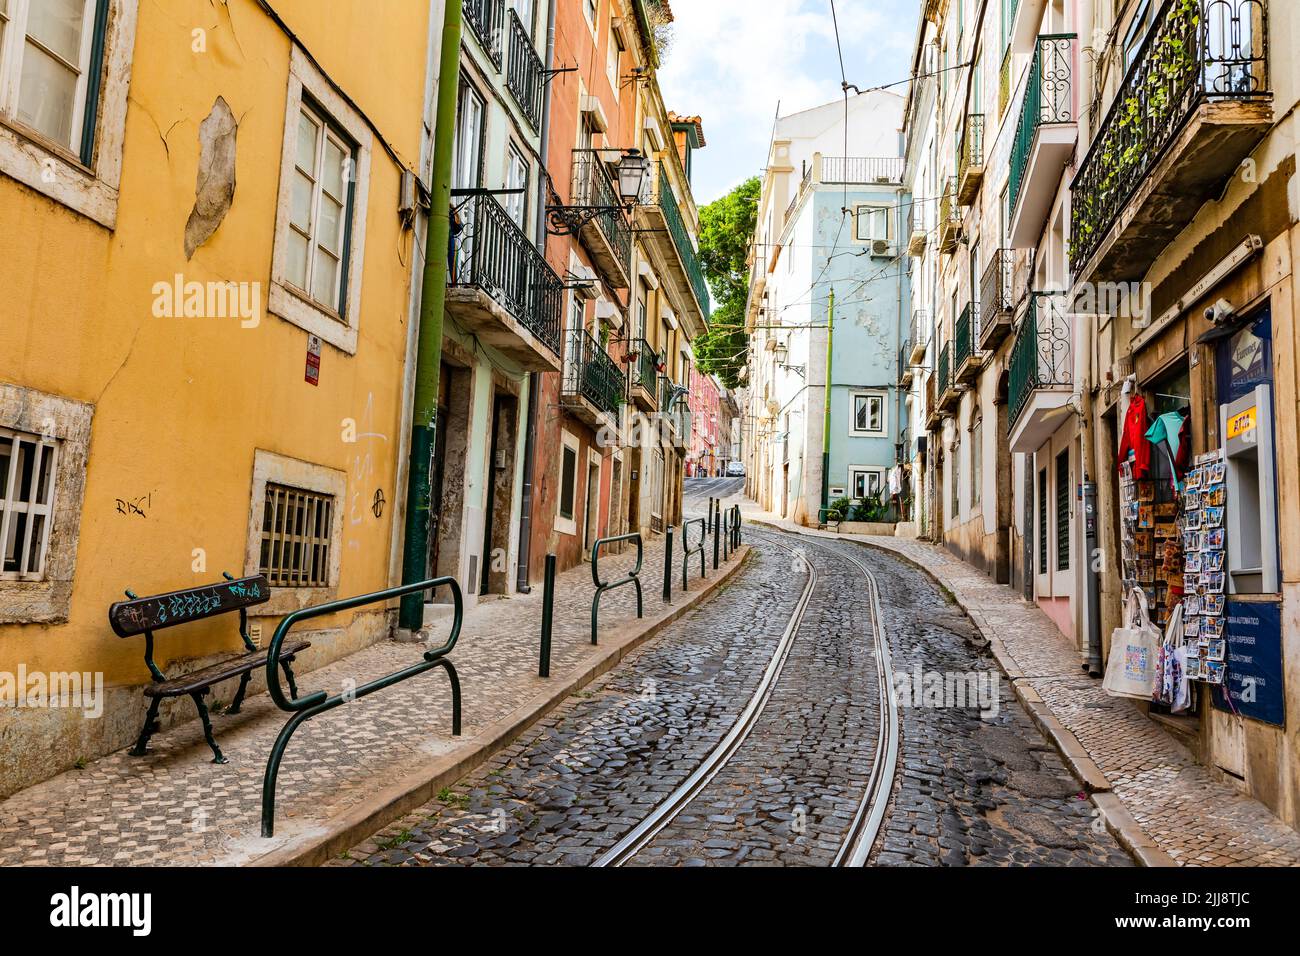 Tram line 28 runs through narrow streets of the old town of Lisbon and is an attraction for tourists, Portugal Stock Photo